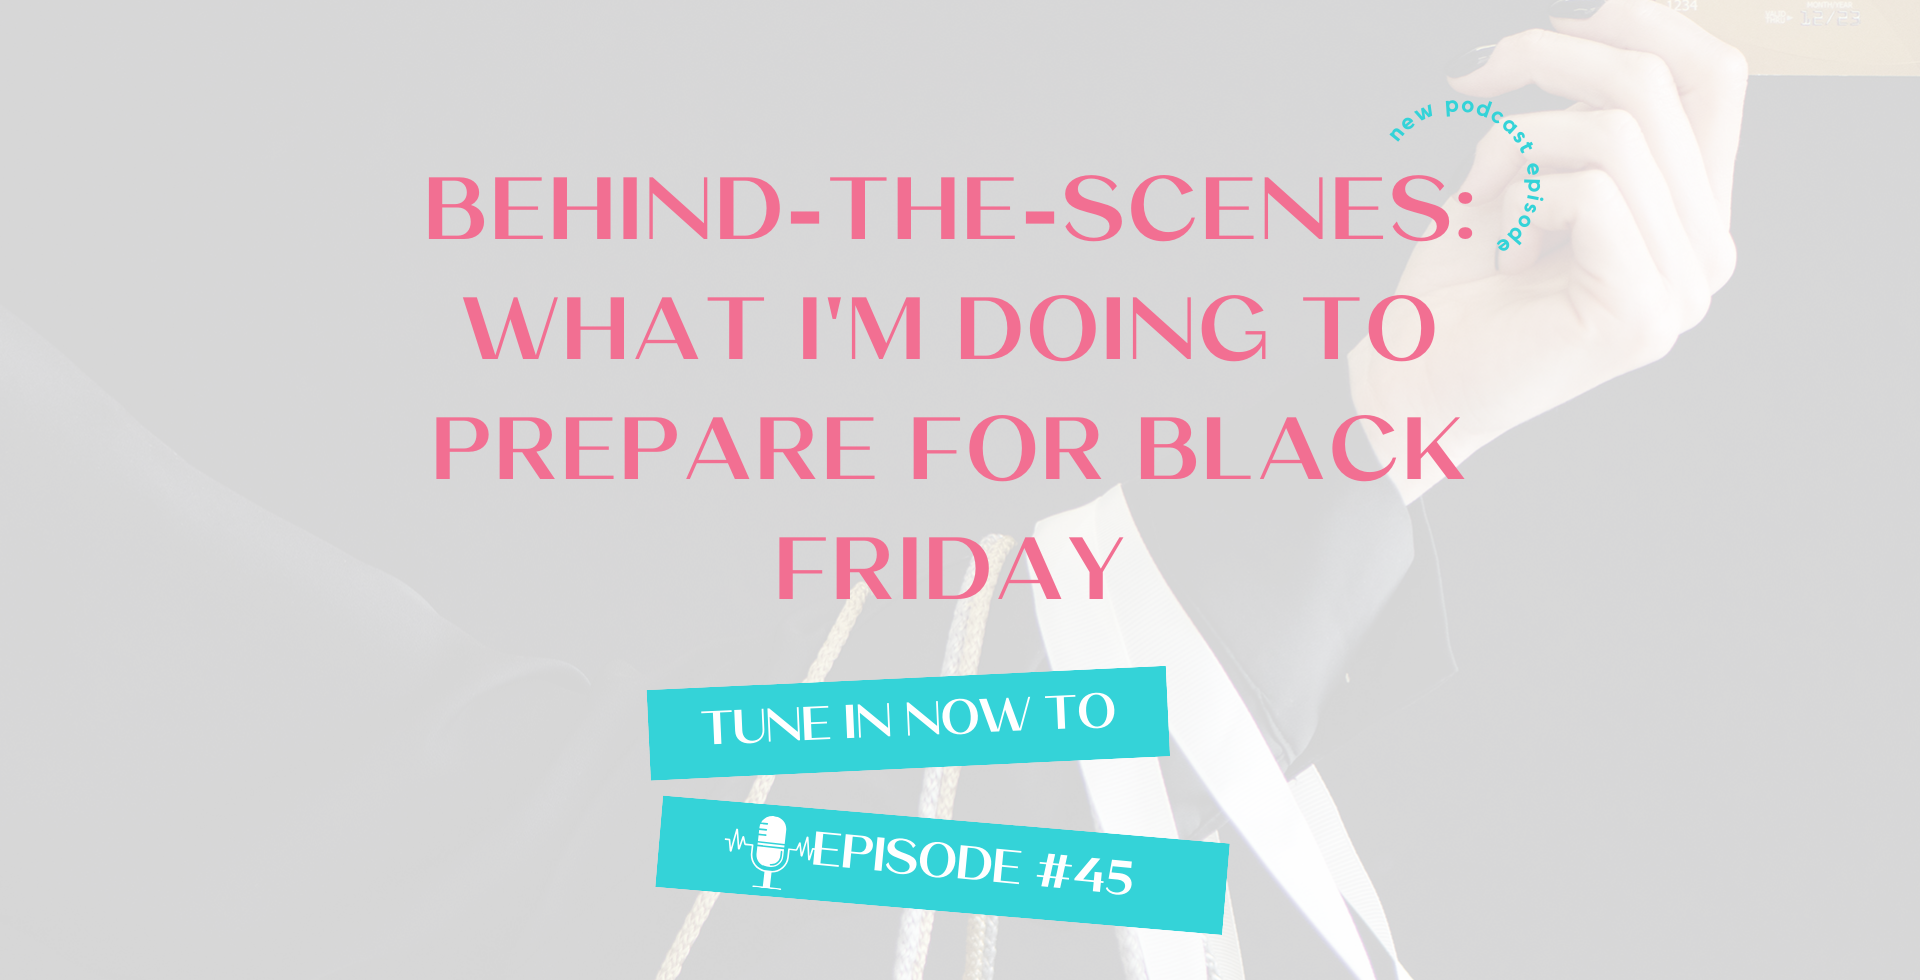 A transparent image of an arm holding a credit card and shopping bags, with the podcast episode title: Behind-the-Scenes: What I'm Doing to Prepare for Black Friday